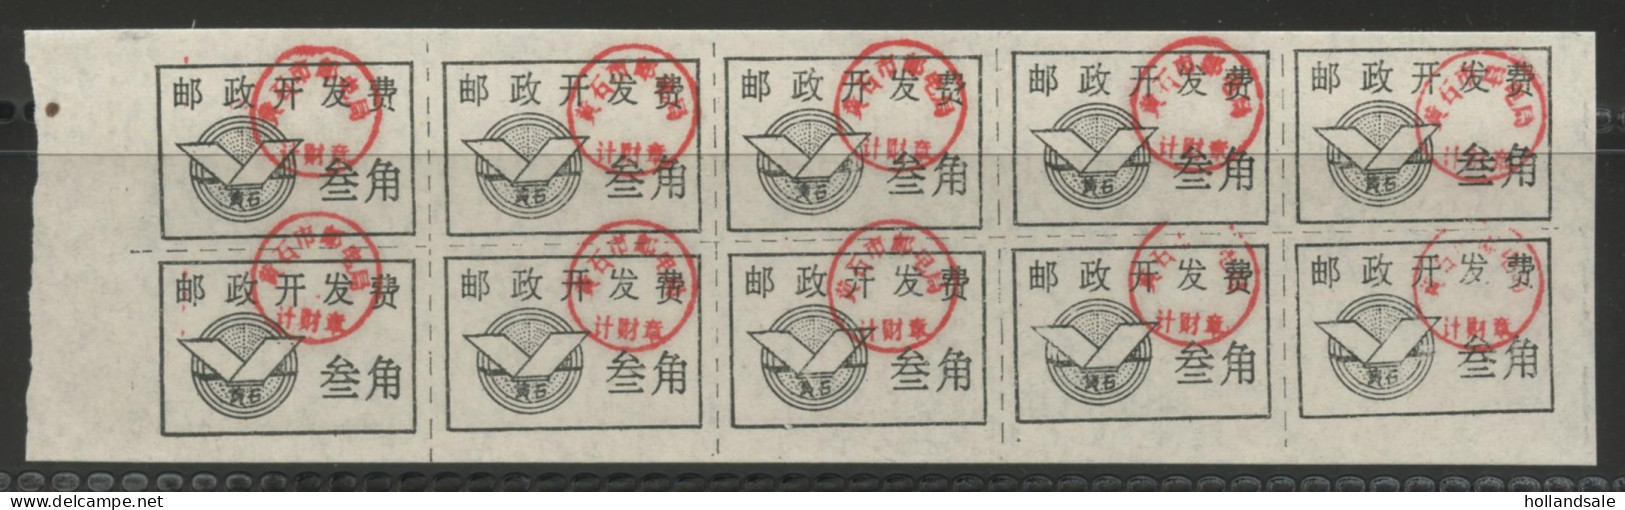 CHINA PRC / ADDED CHARGE - Labels Of Huangshi City, Hubei Prov. D&O 12-0167.  Block Of 10. - Portomarken